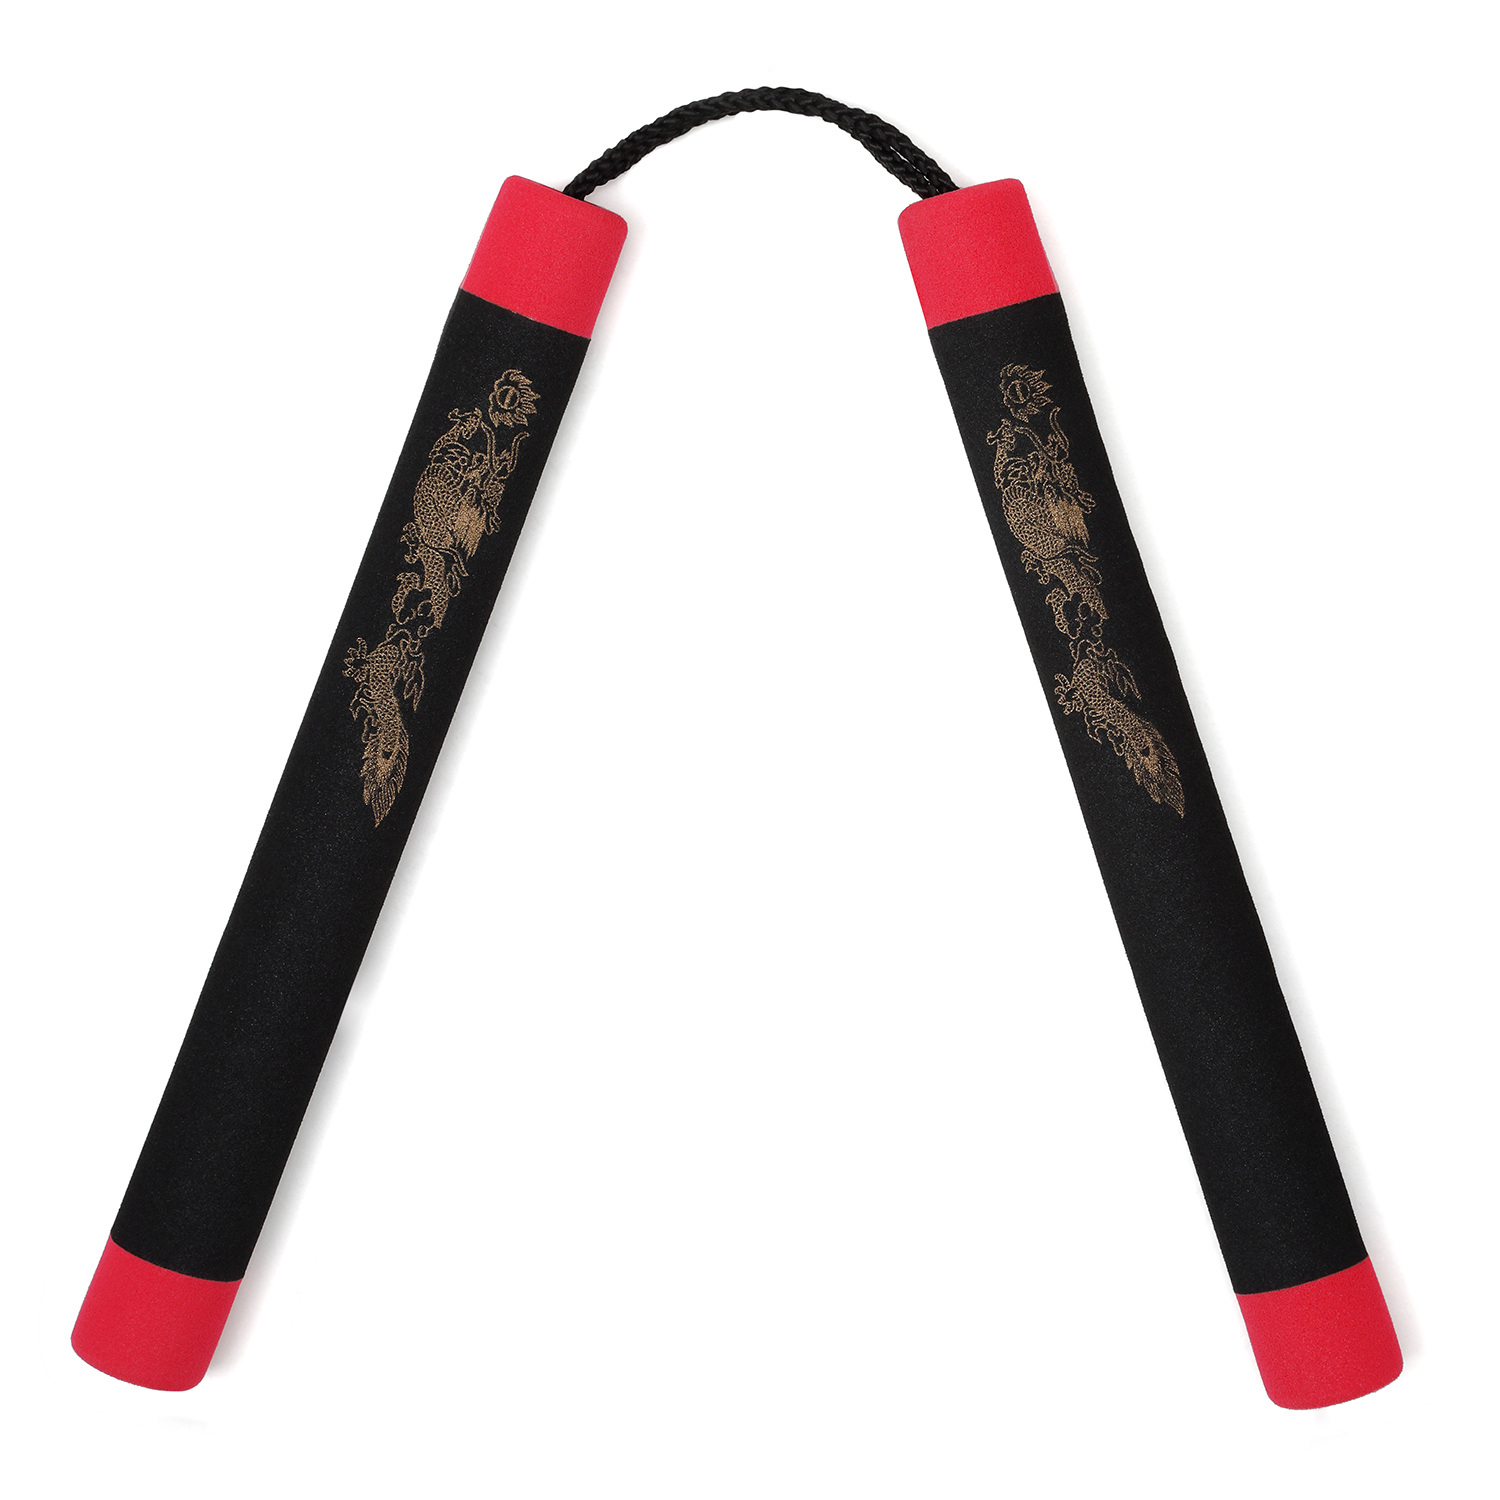 NR-005c: Foam Nunchaku with Cord Black Dragon With Red Tips - Click Image to Close